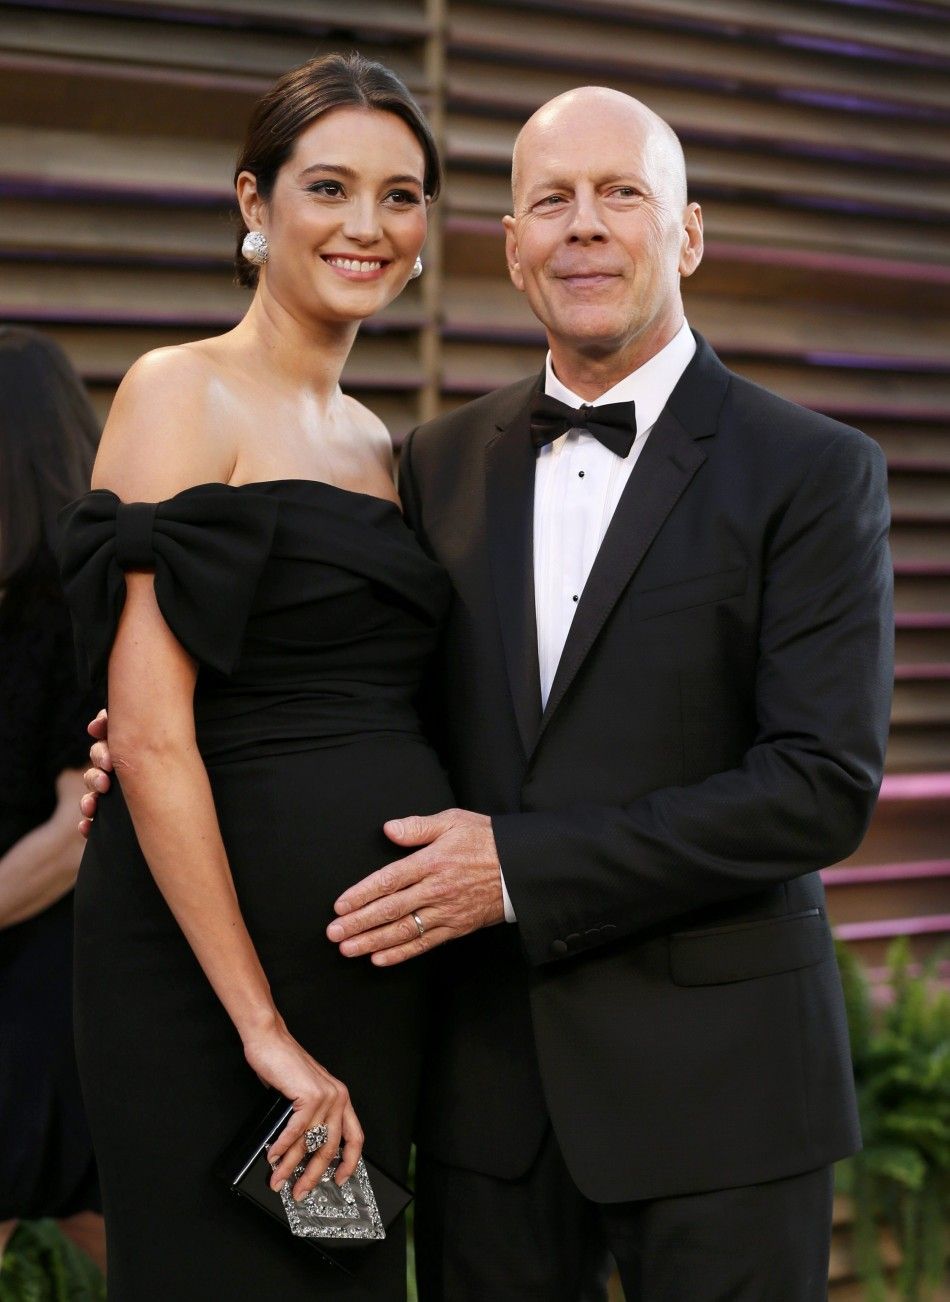 Bruce Willis and Wife at 2014 Oscars